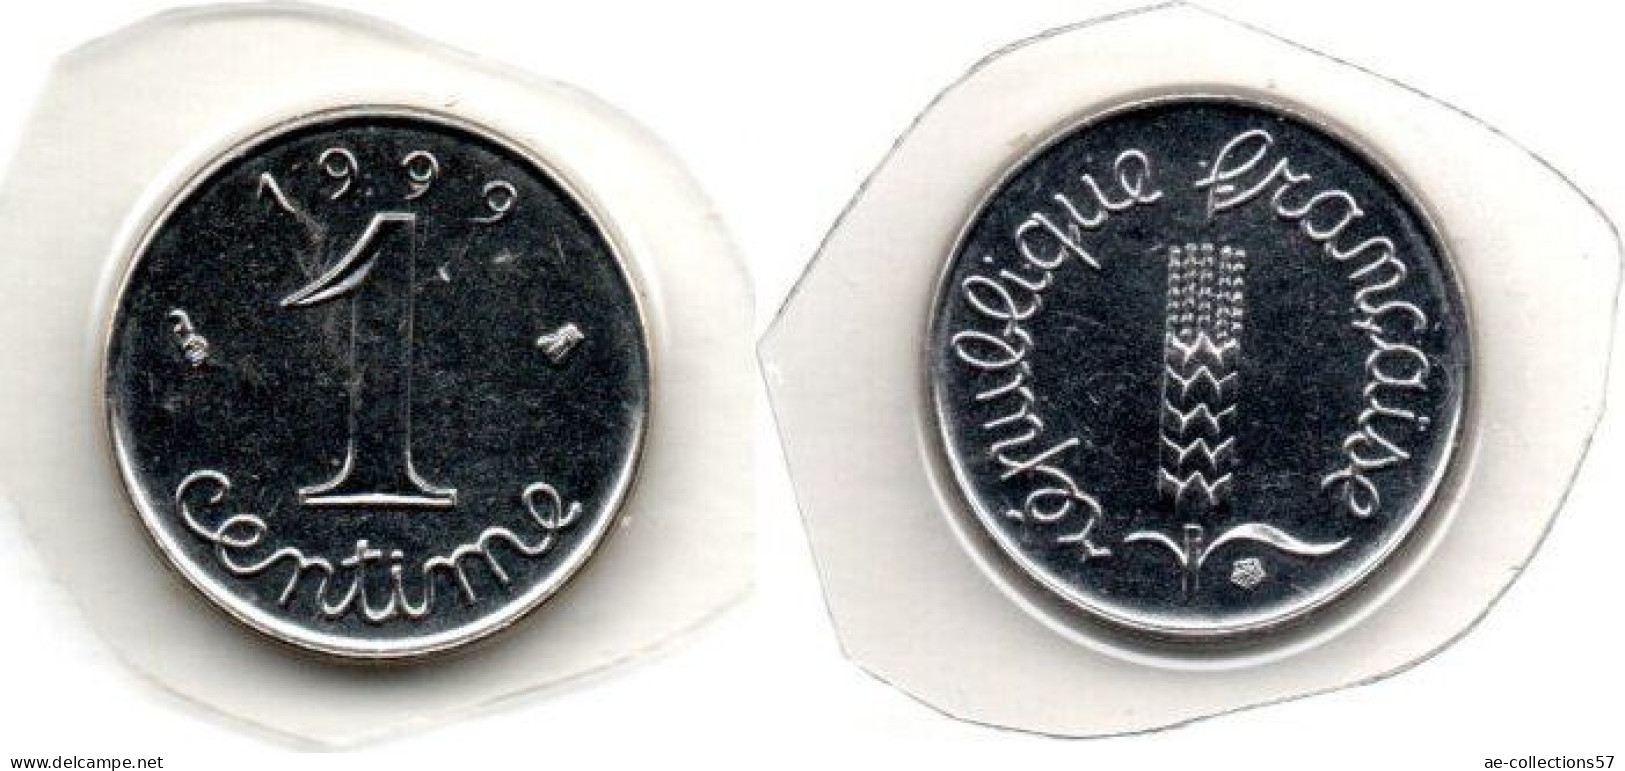 MA 24097 / 1 Centime 1999 FDC - 1 Centime